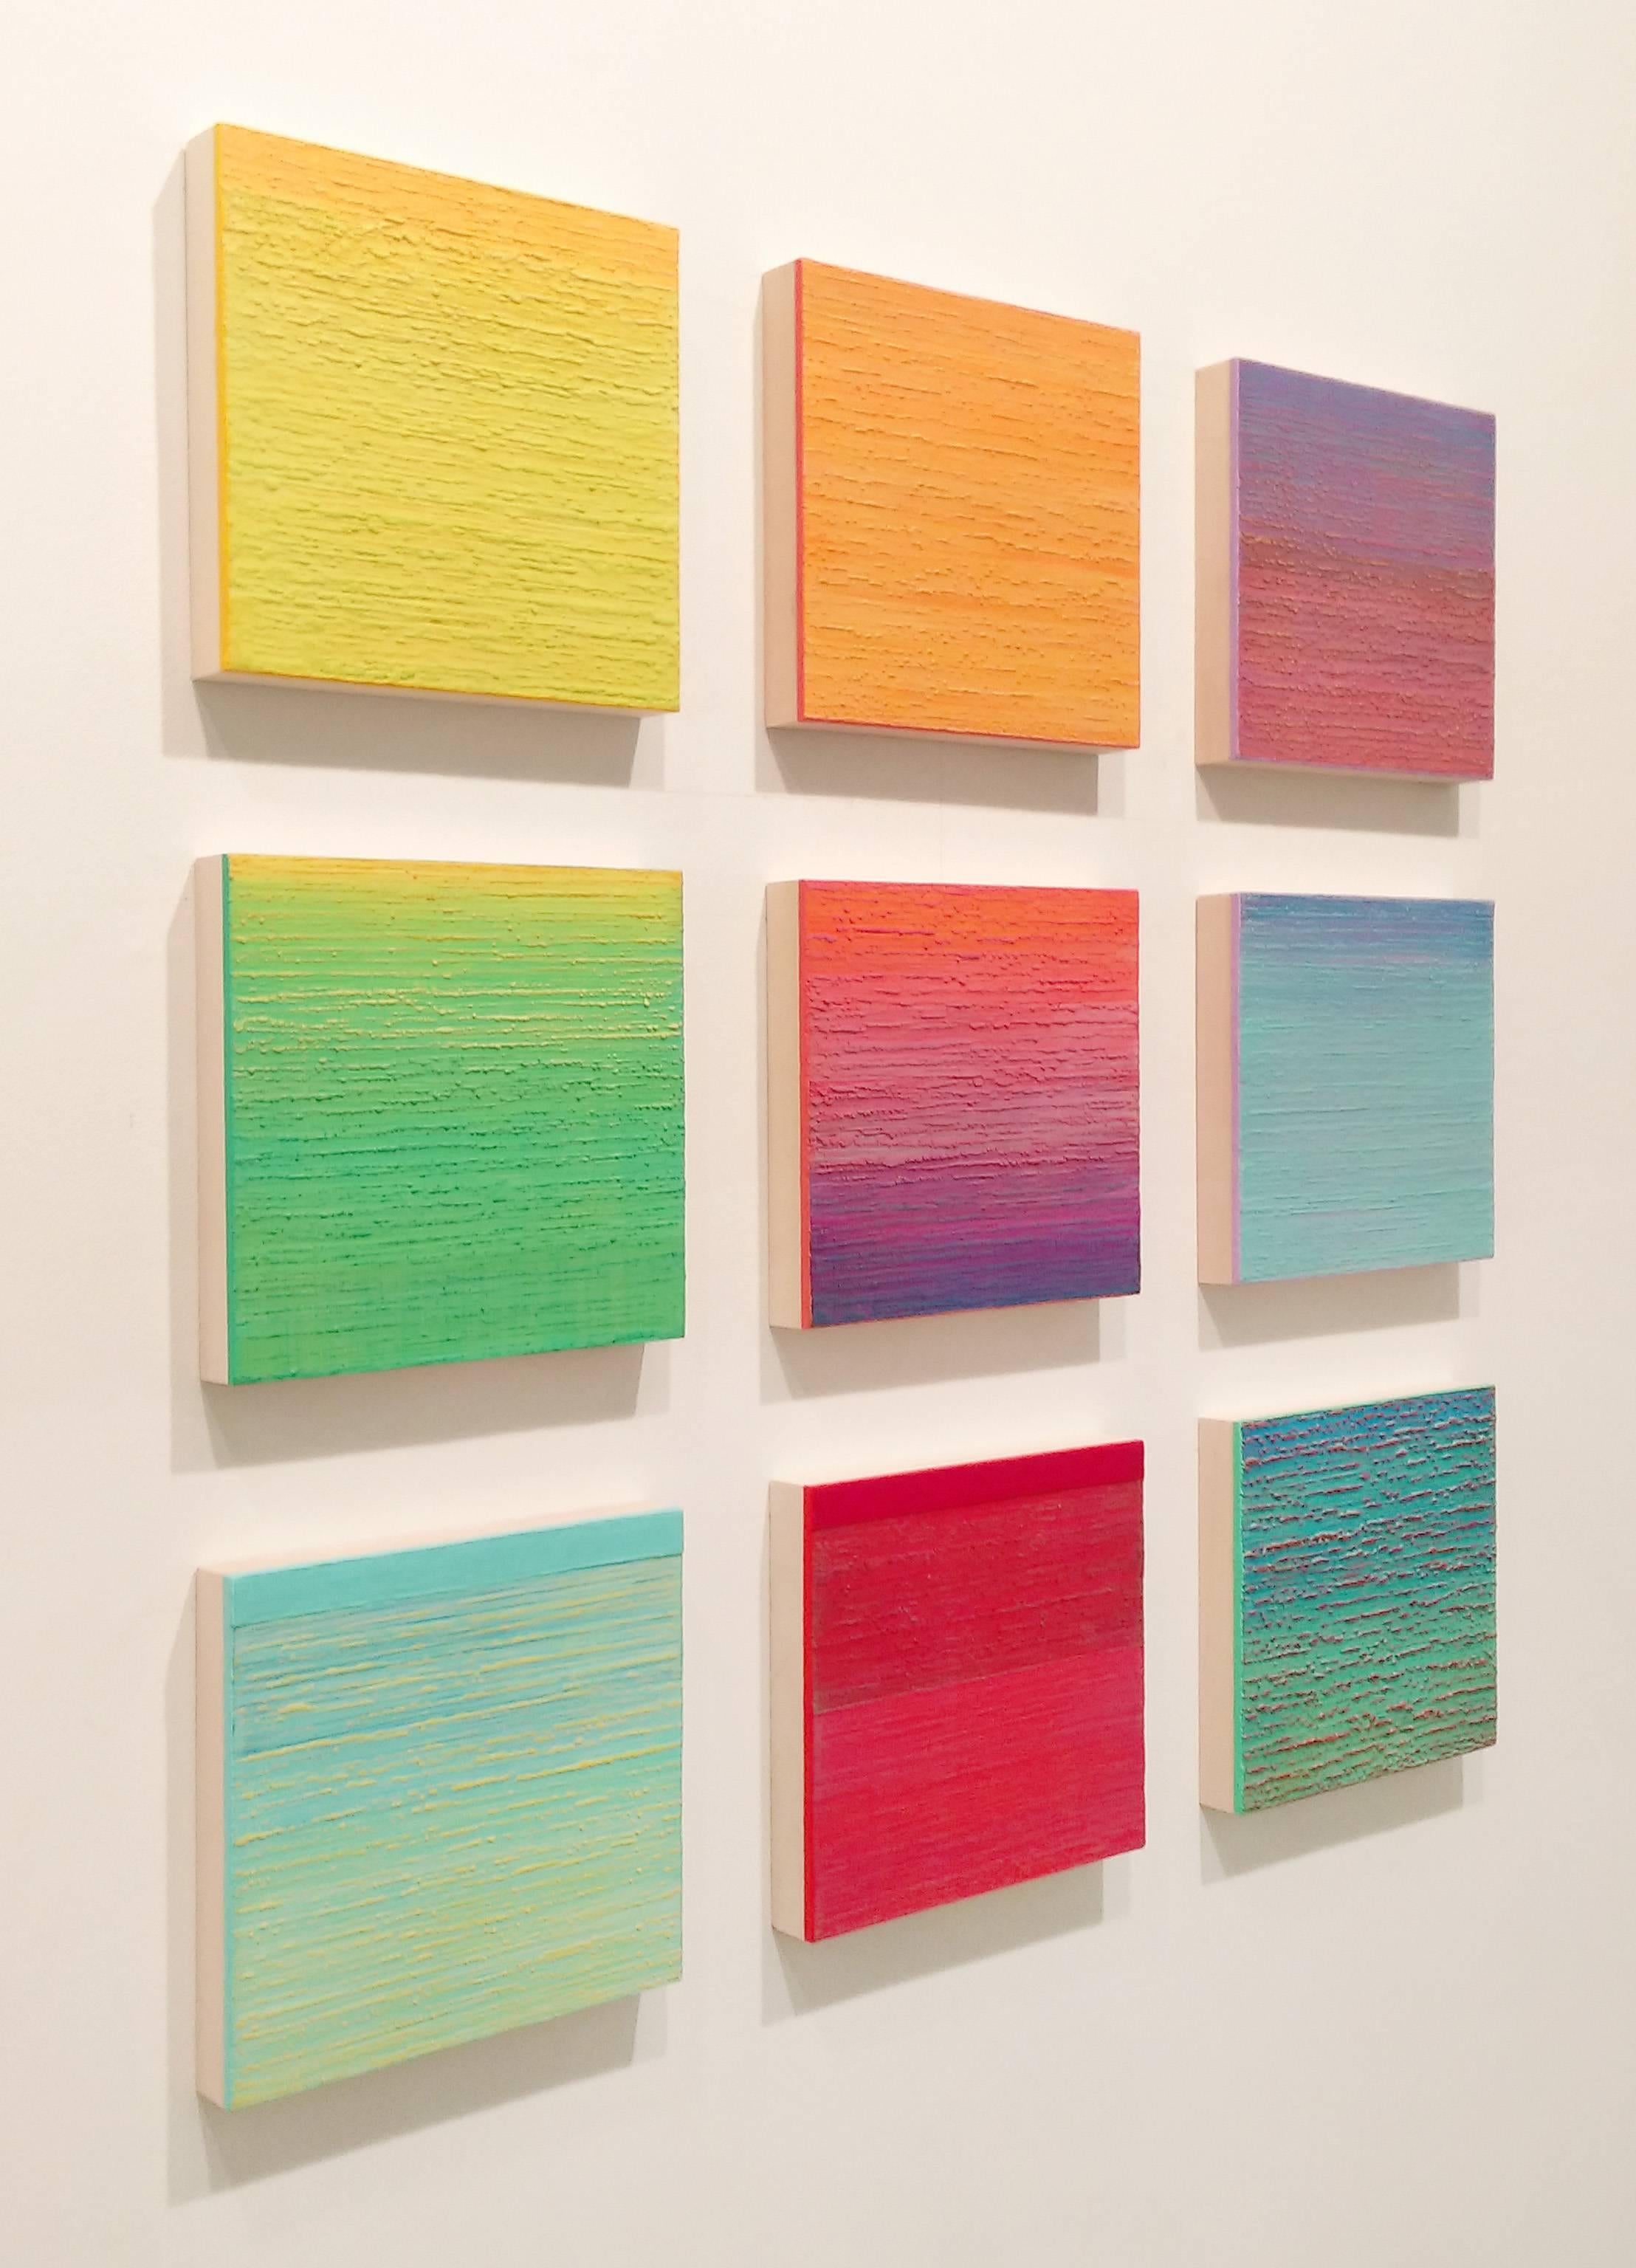 Joanne Mattera's Silk Road 368 is primarily pink, orange, lavender and purple. 

Succulent in color and reductive or repetitive in composition, Joanne Mattera’s ongoing Silk Road series of paintings are achieved by manipulating layers of translucent